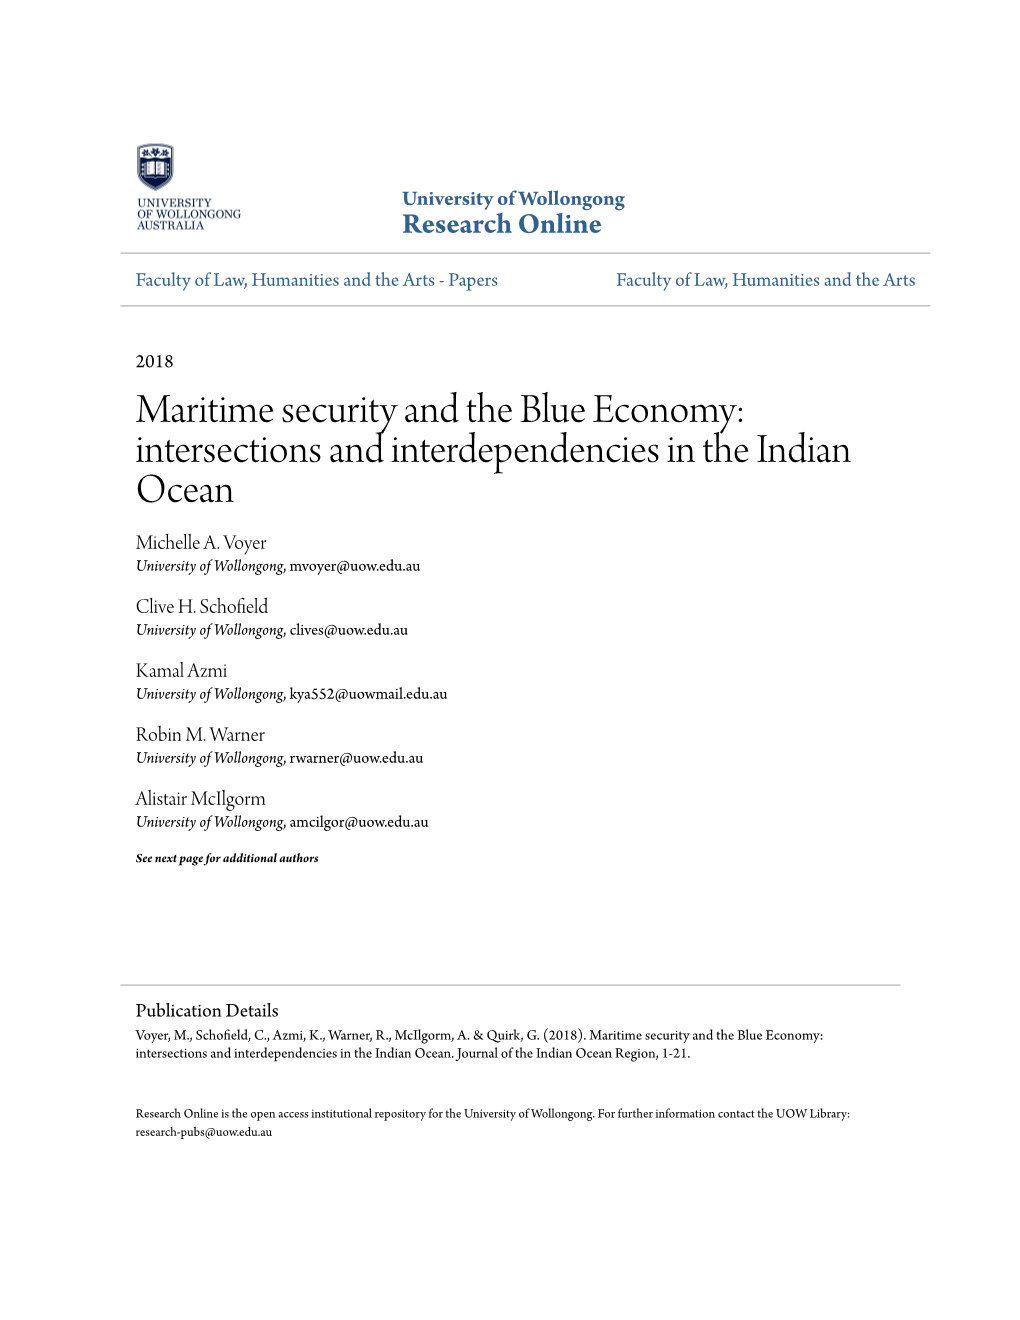 Maritime Security and the Blue Economy: Intersections and Interdependencies in the Indian Ocean Michelle A